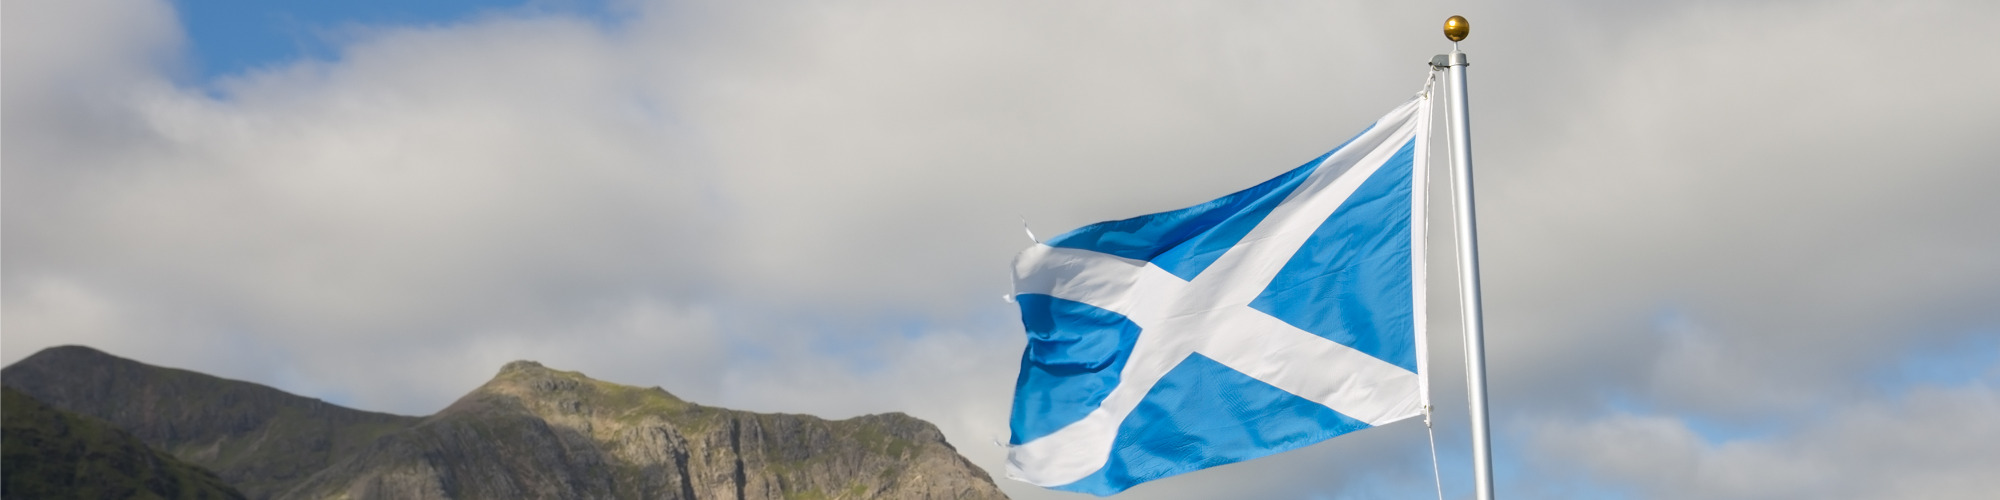 Managing & Administering Trusts in Scotland - Beyond the Basics